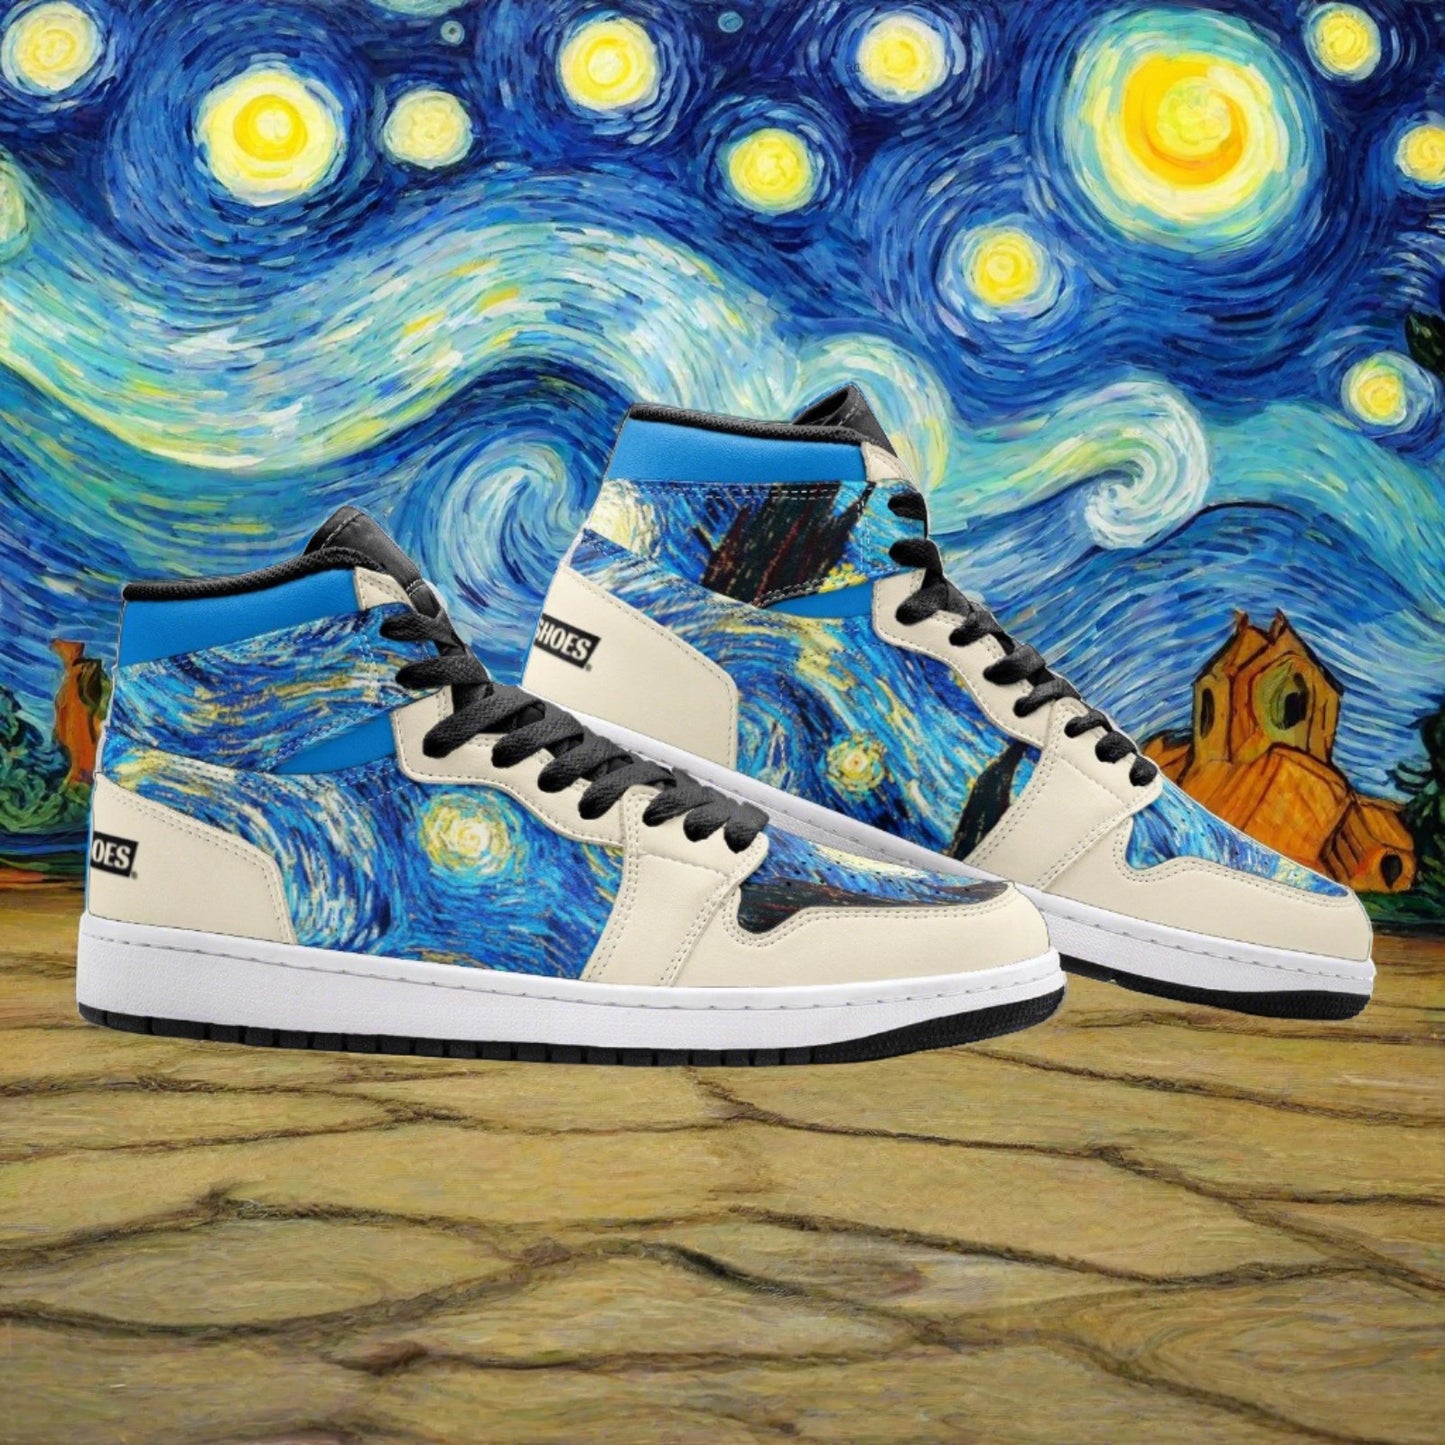 "Starry Night" by Vincent Van Gogh - Freaky Shoes®